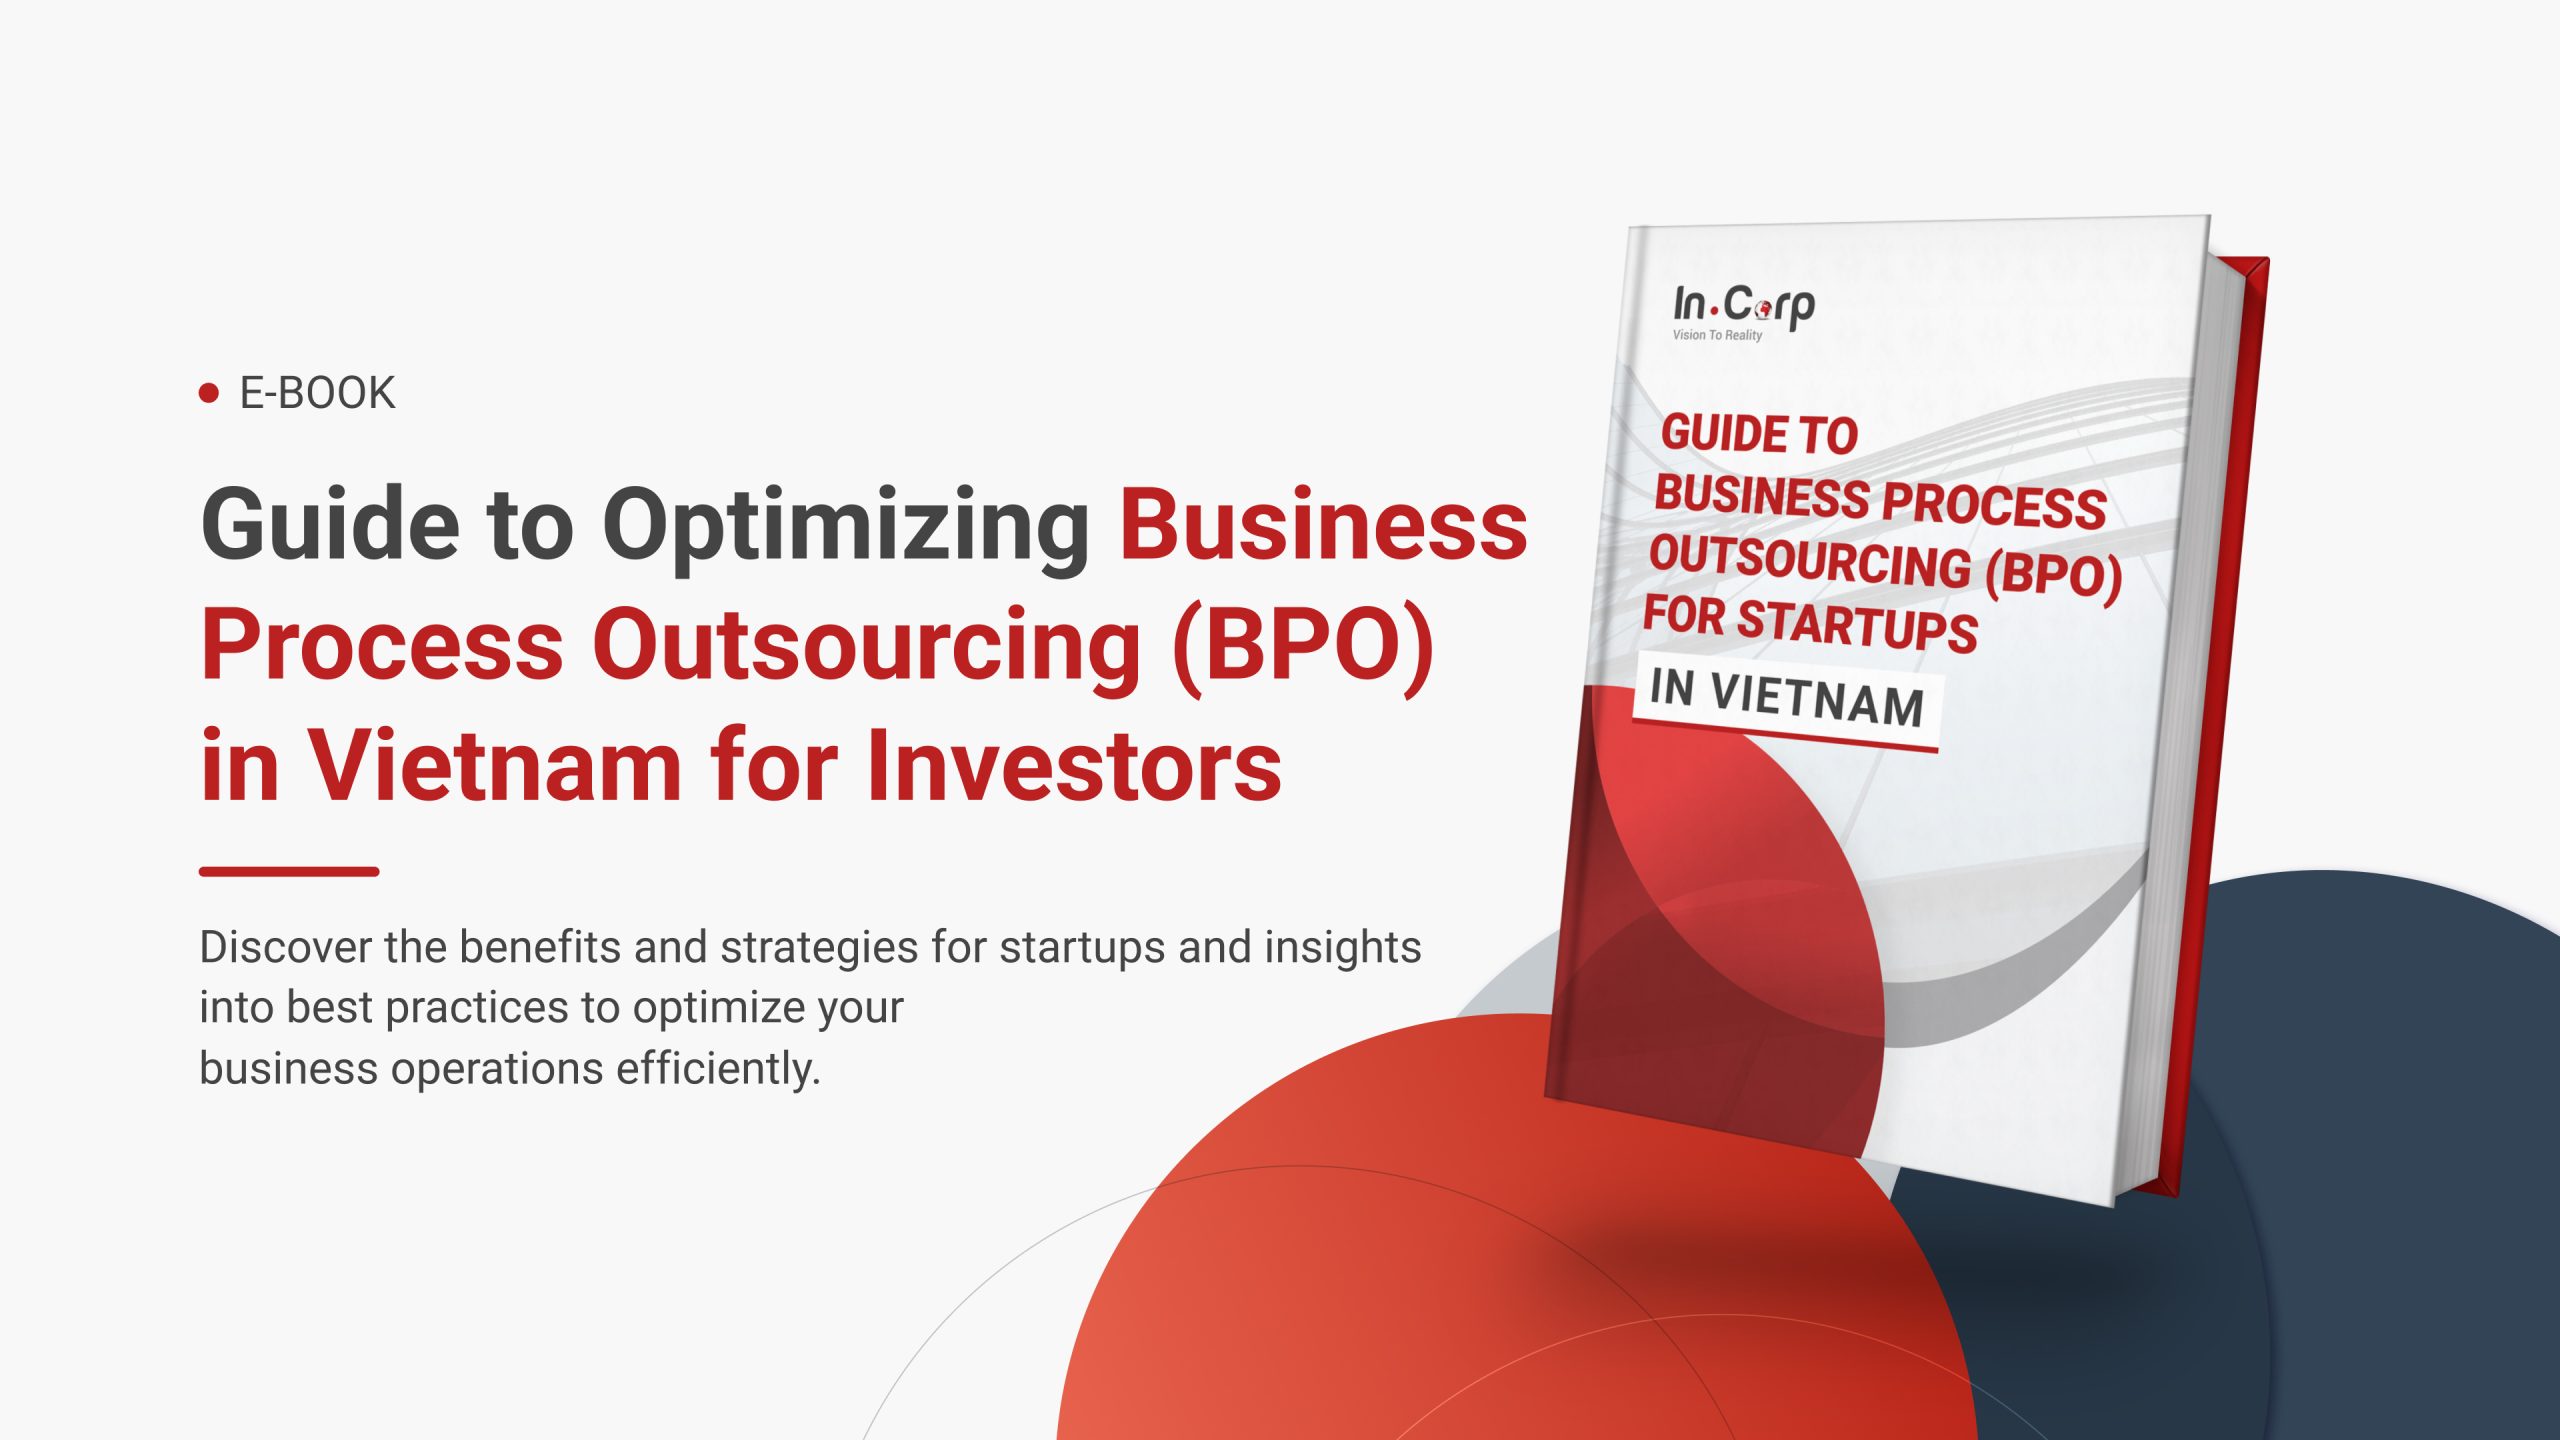 Guide to Optimizing Business Process Outsourcing (BPO) in Vietnam for Startups